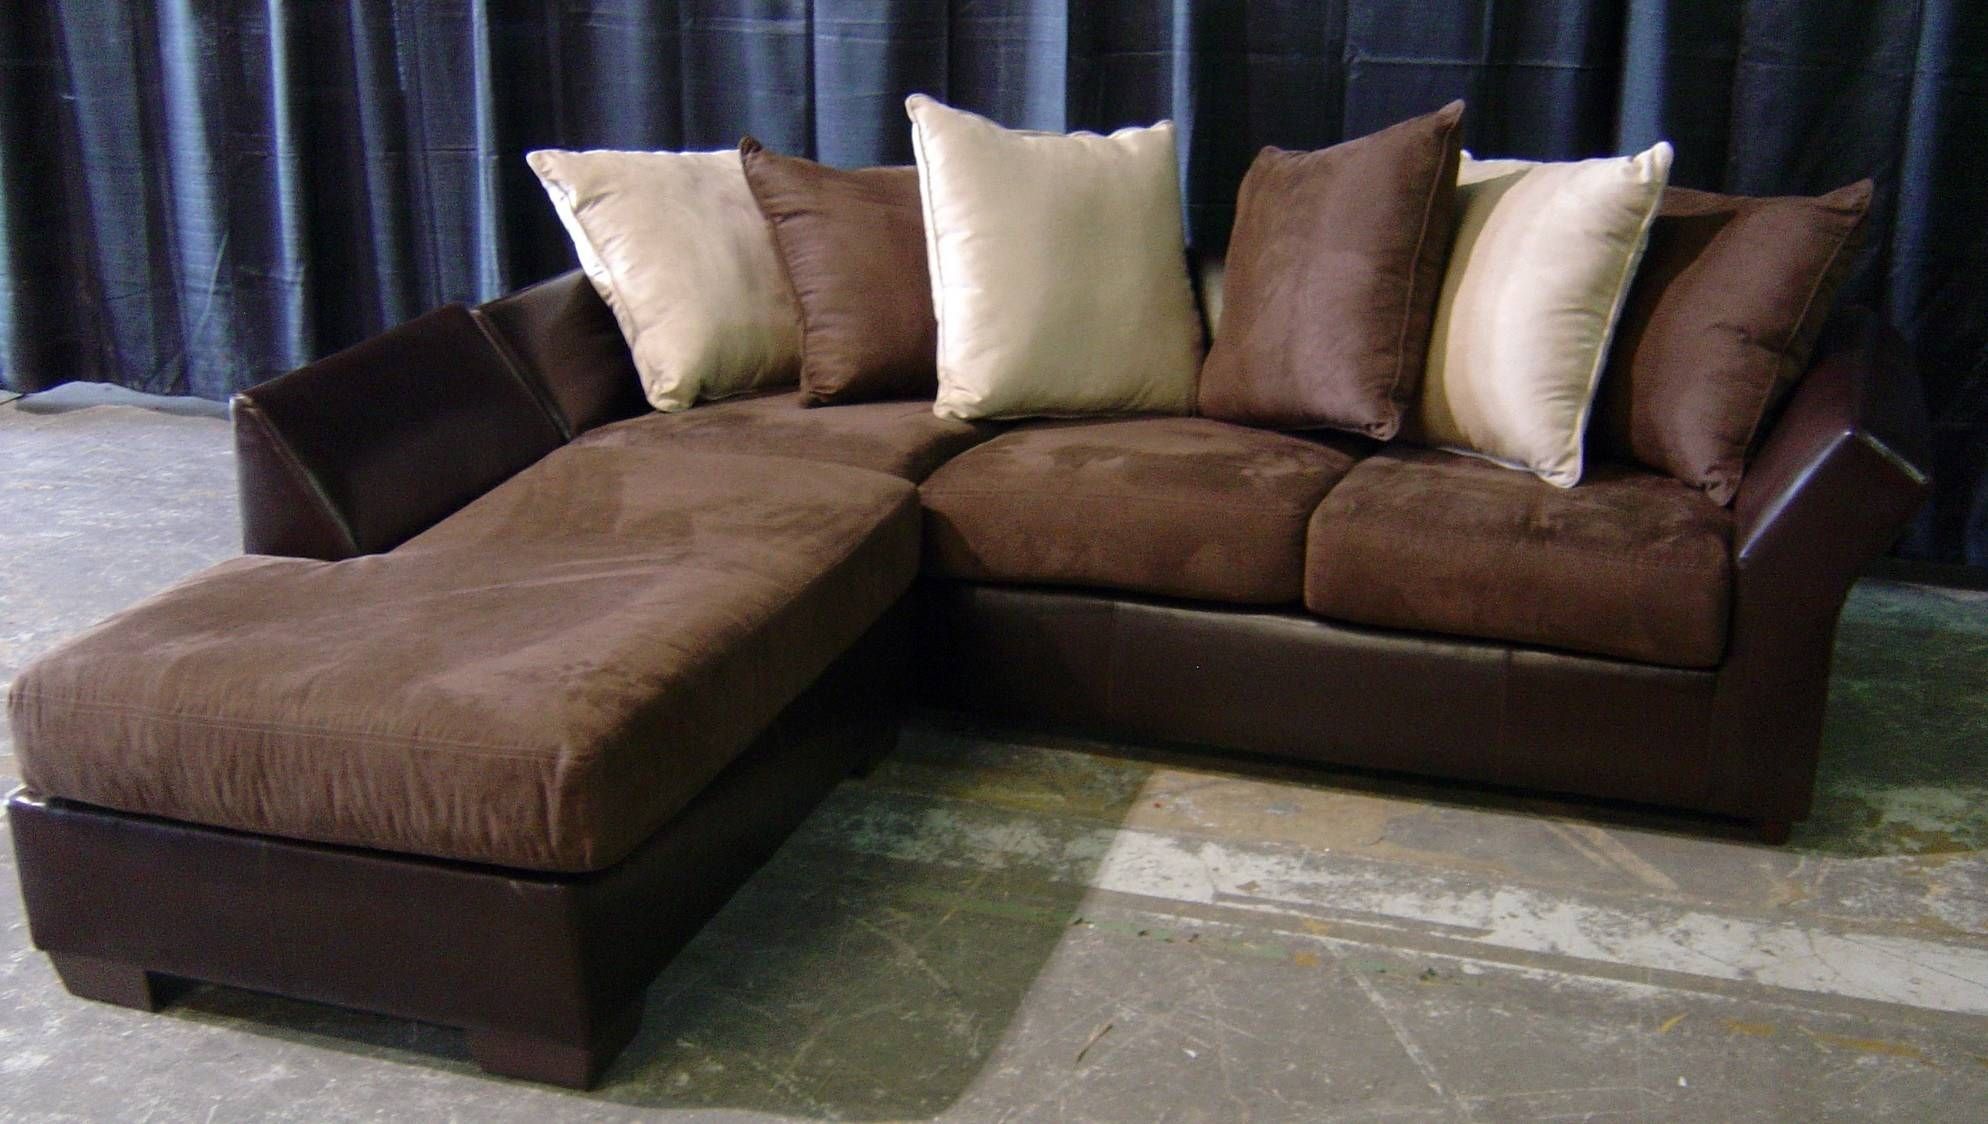 Furniture: Astonishing Craigslist Missoula Furniture For Home Throughout Craigslist Sectional Sofas (View 1 of 15)